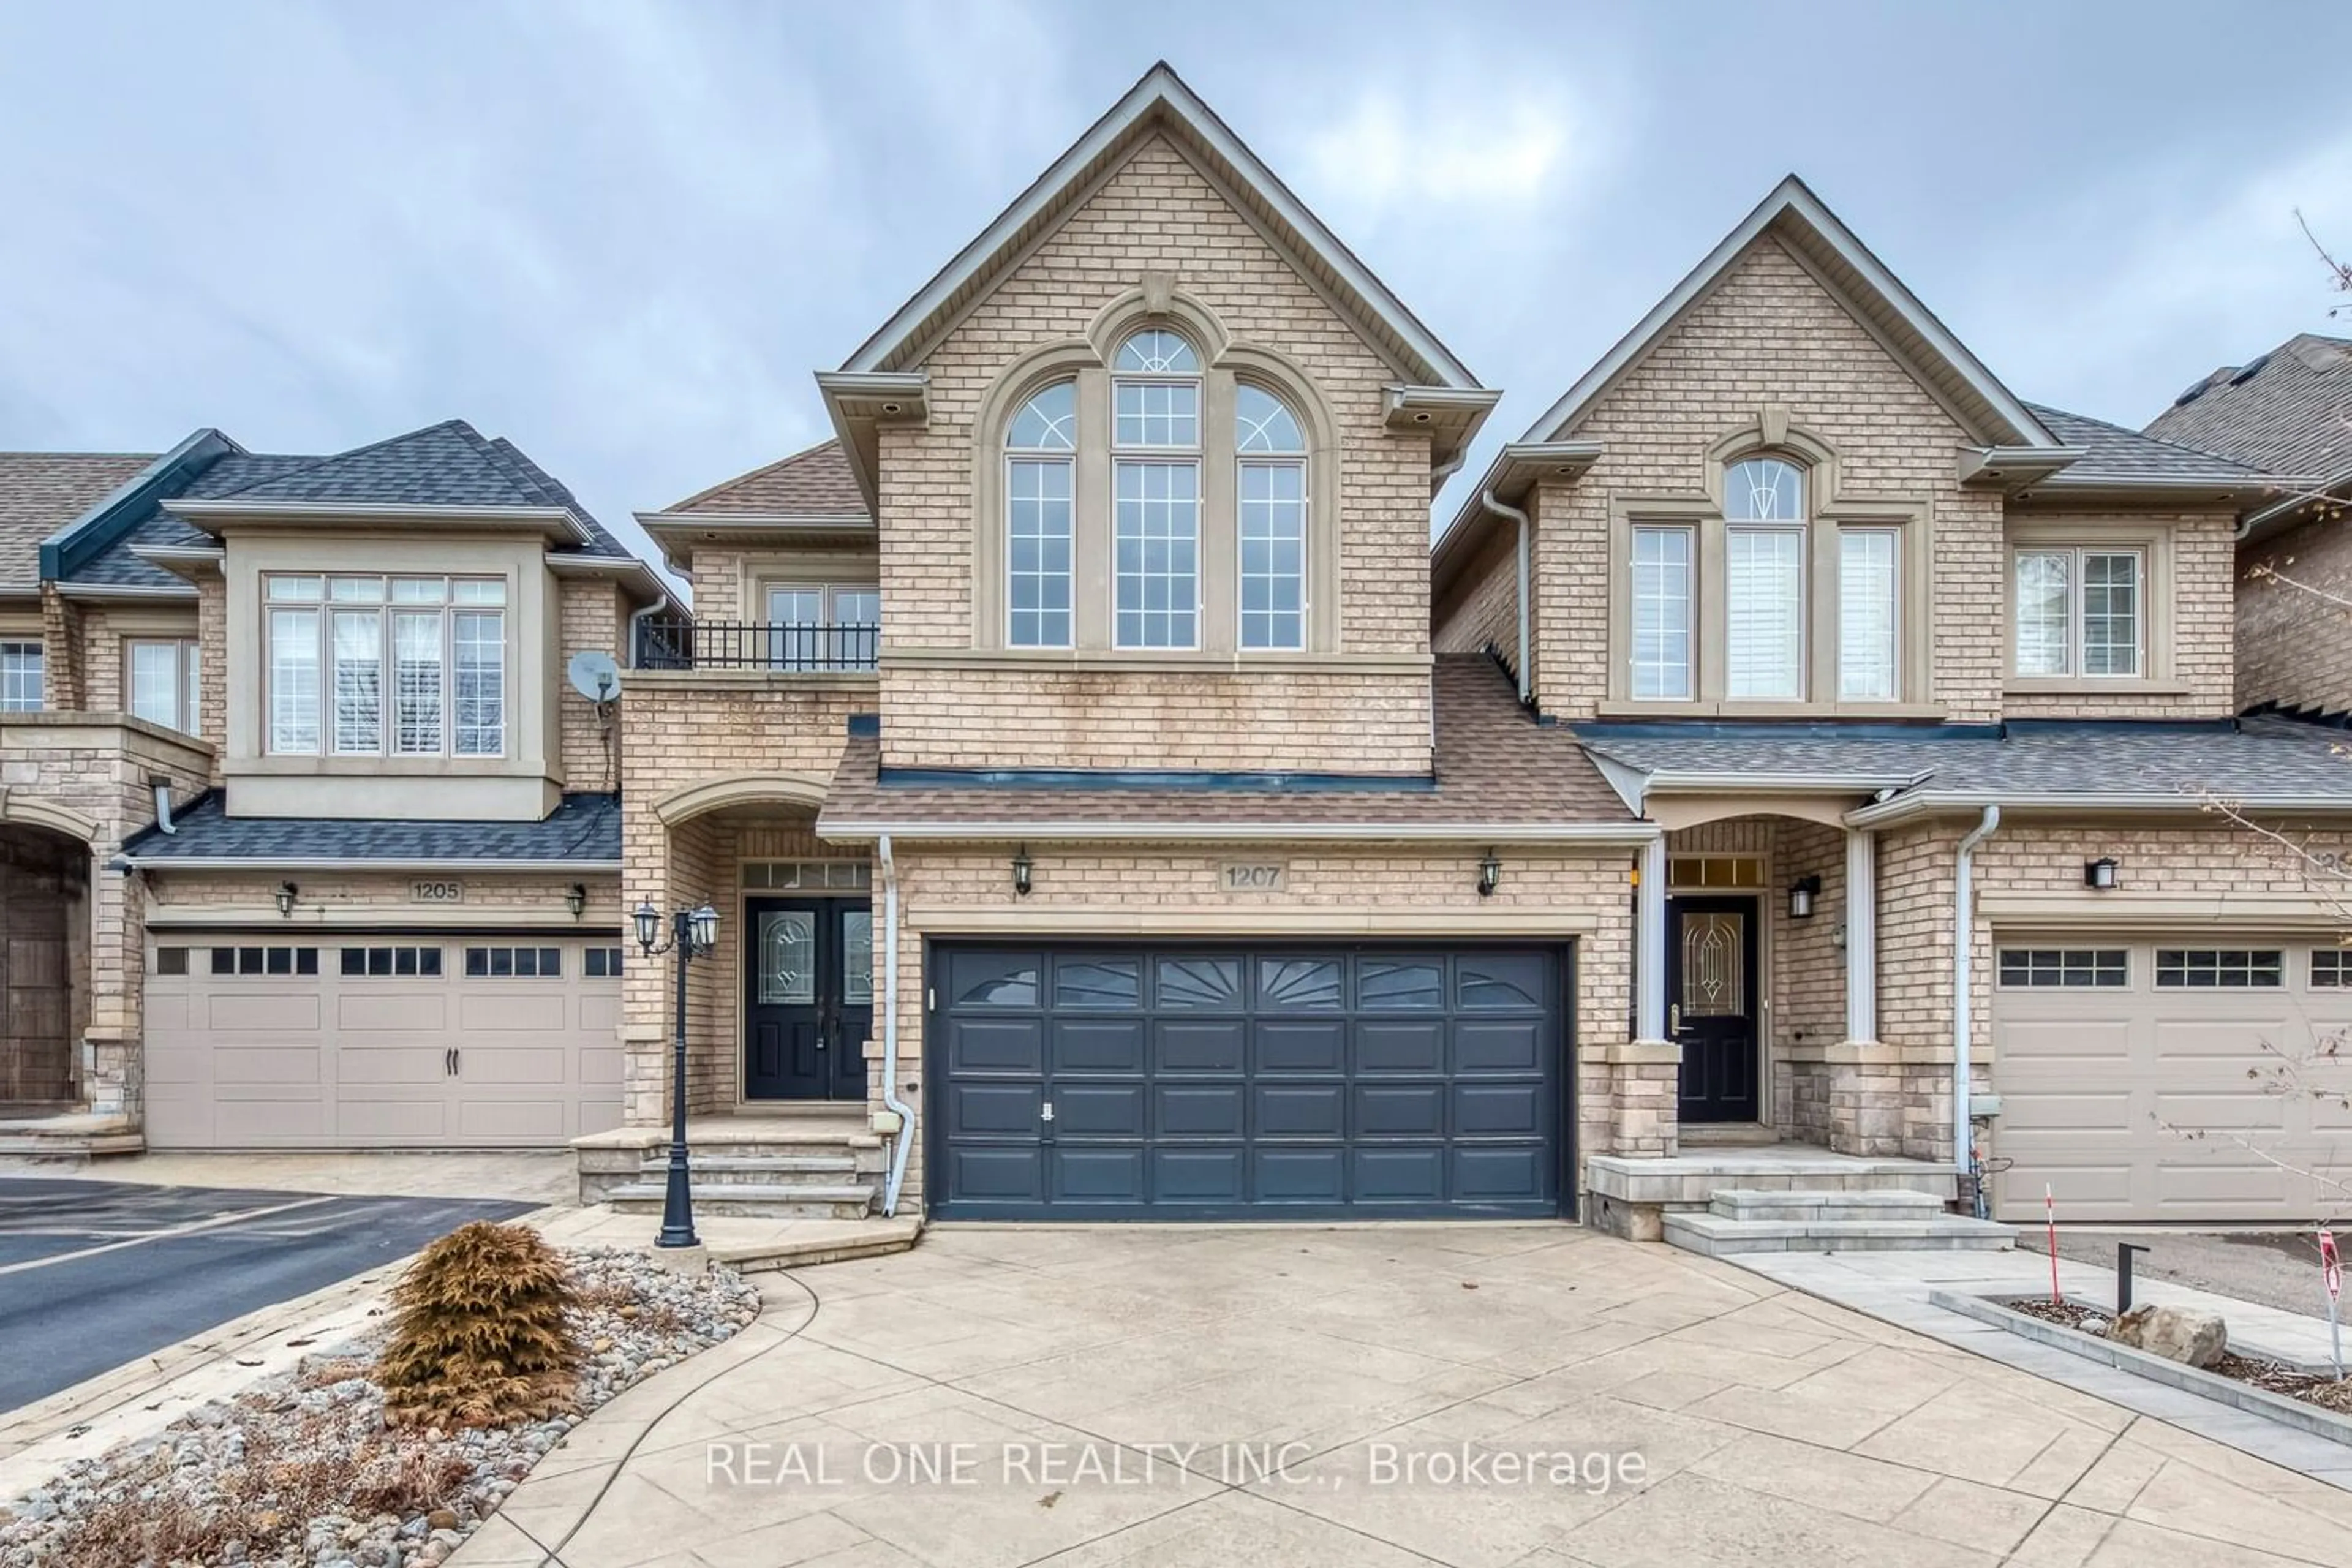 Home with brick exterior material for 1207 Agram Dr, Oakville Ontario L6H 7P1